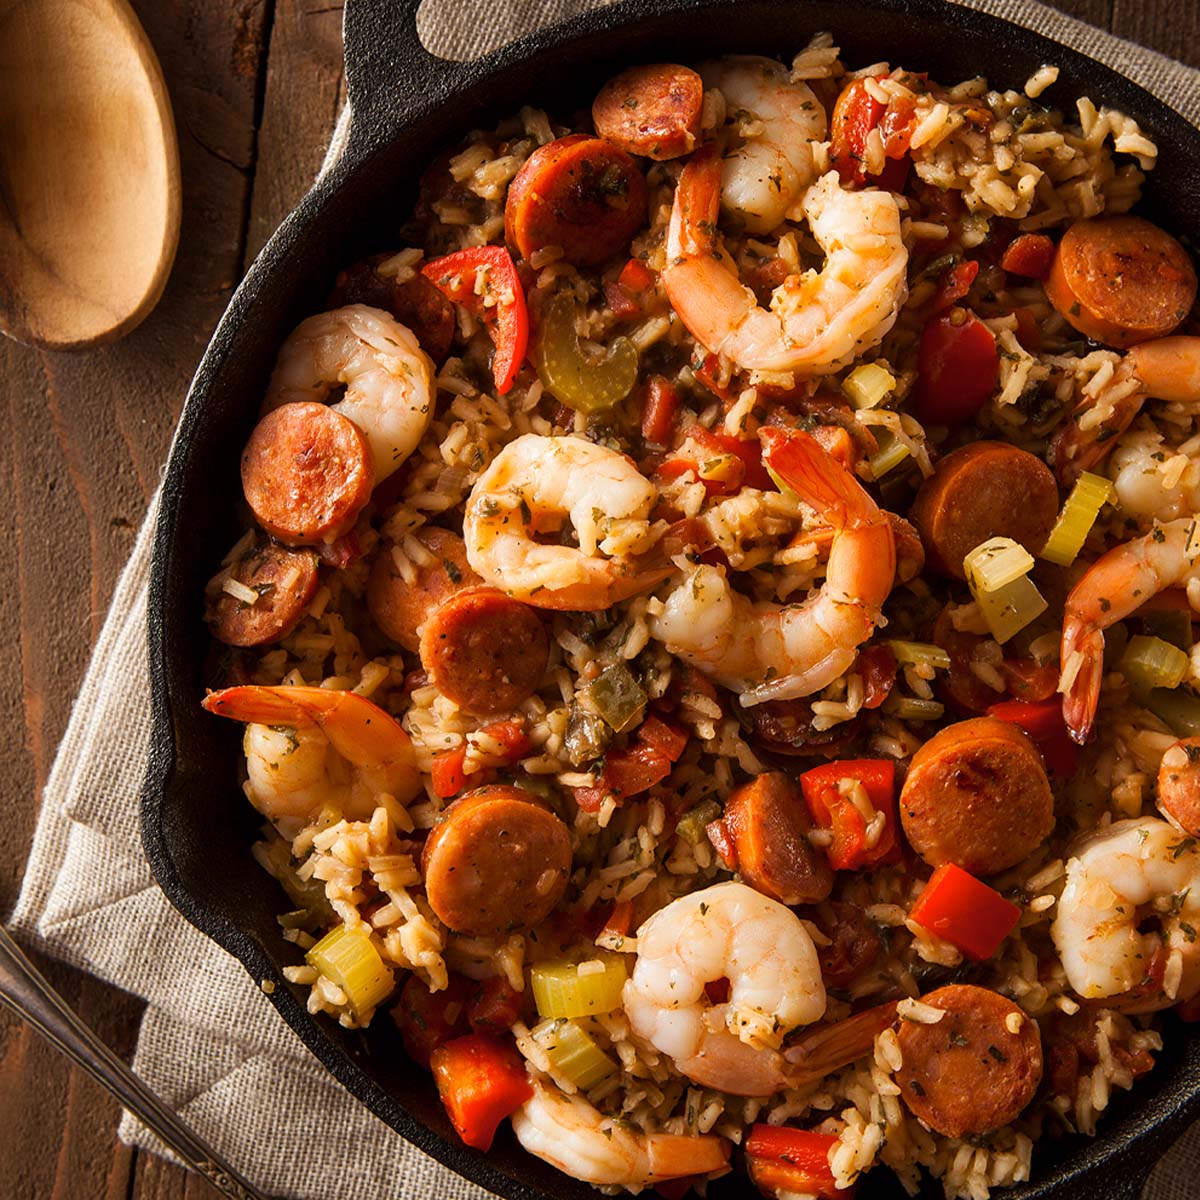 For me, the best way of reheating leftover Jambalaya is in my oven. Yes, it does take a little longer, but it's well worth it if you do it properly.